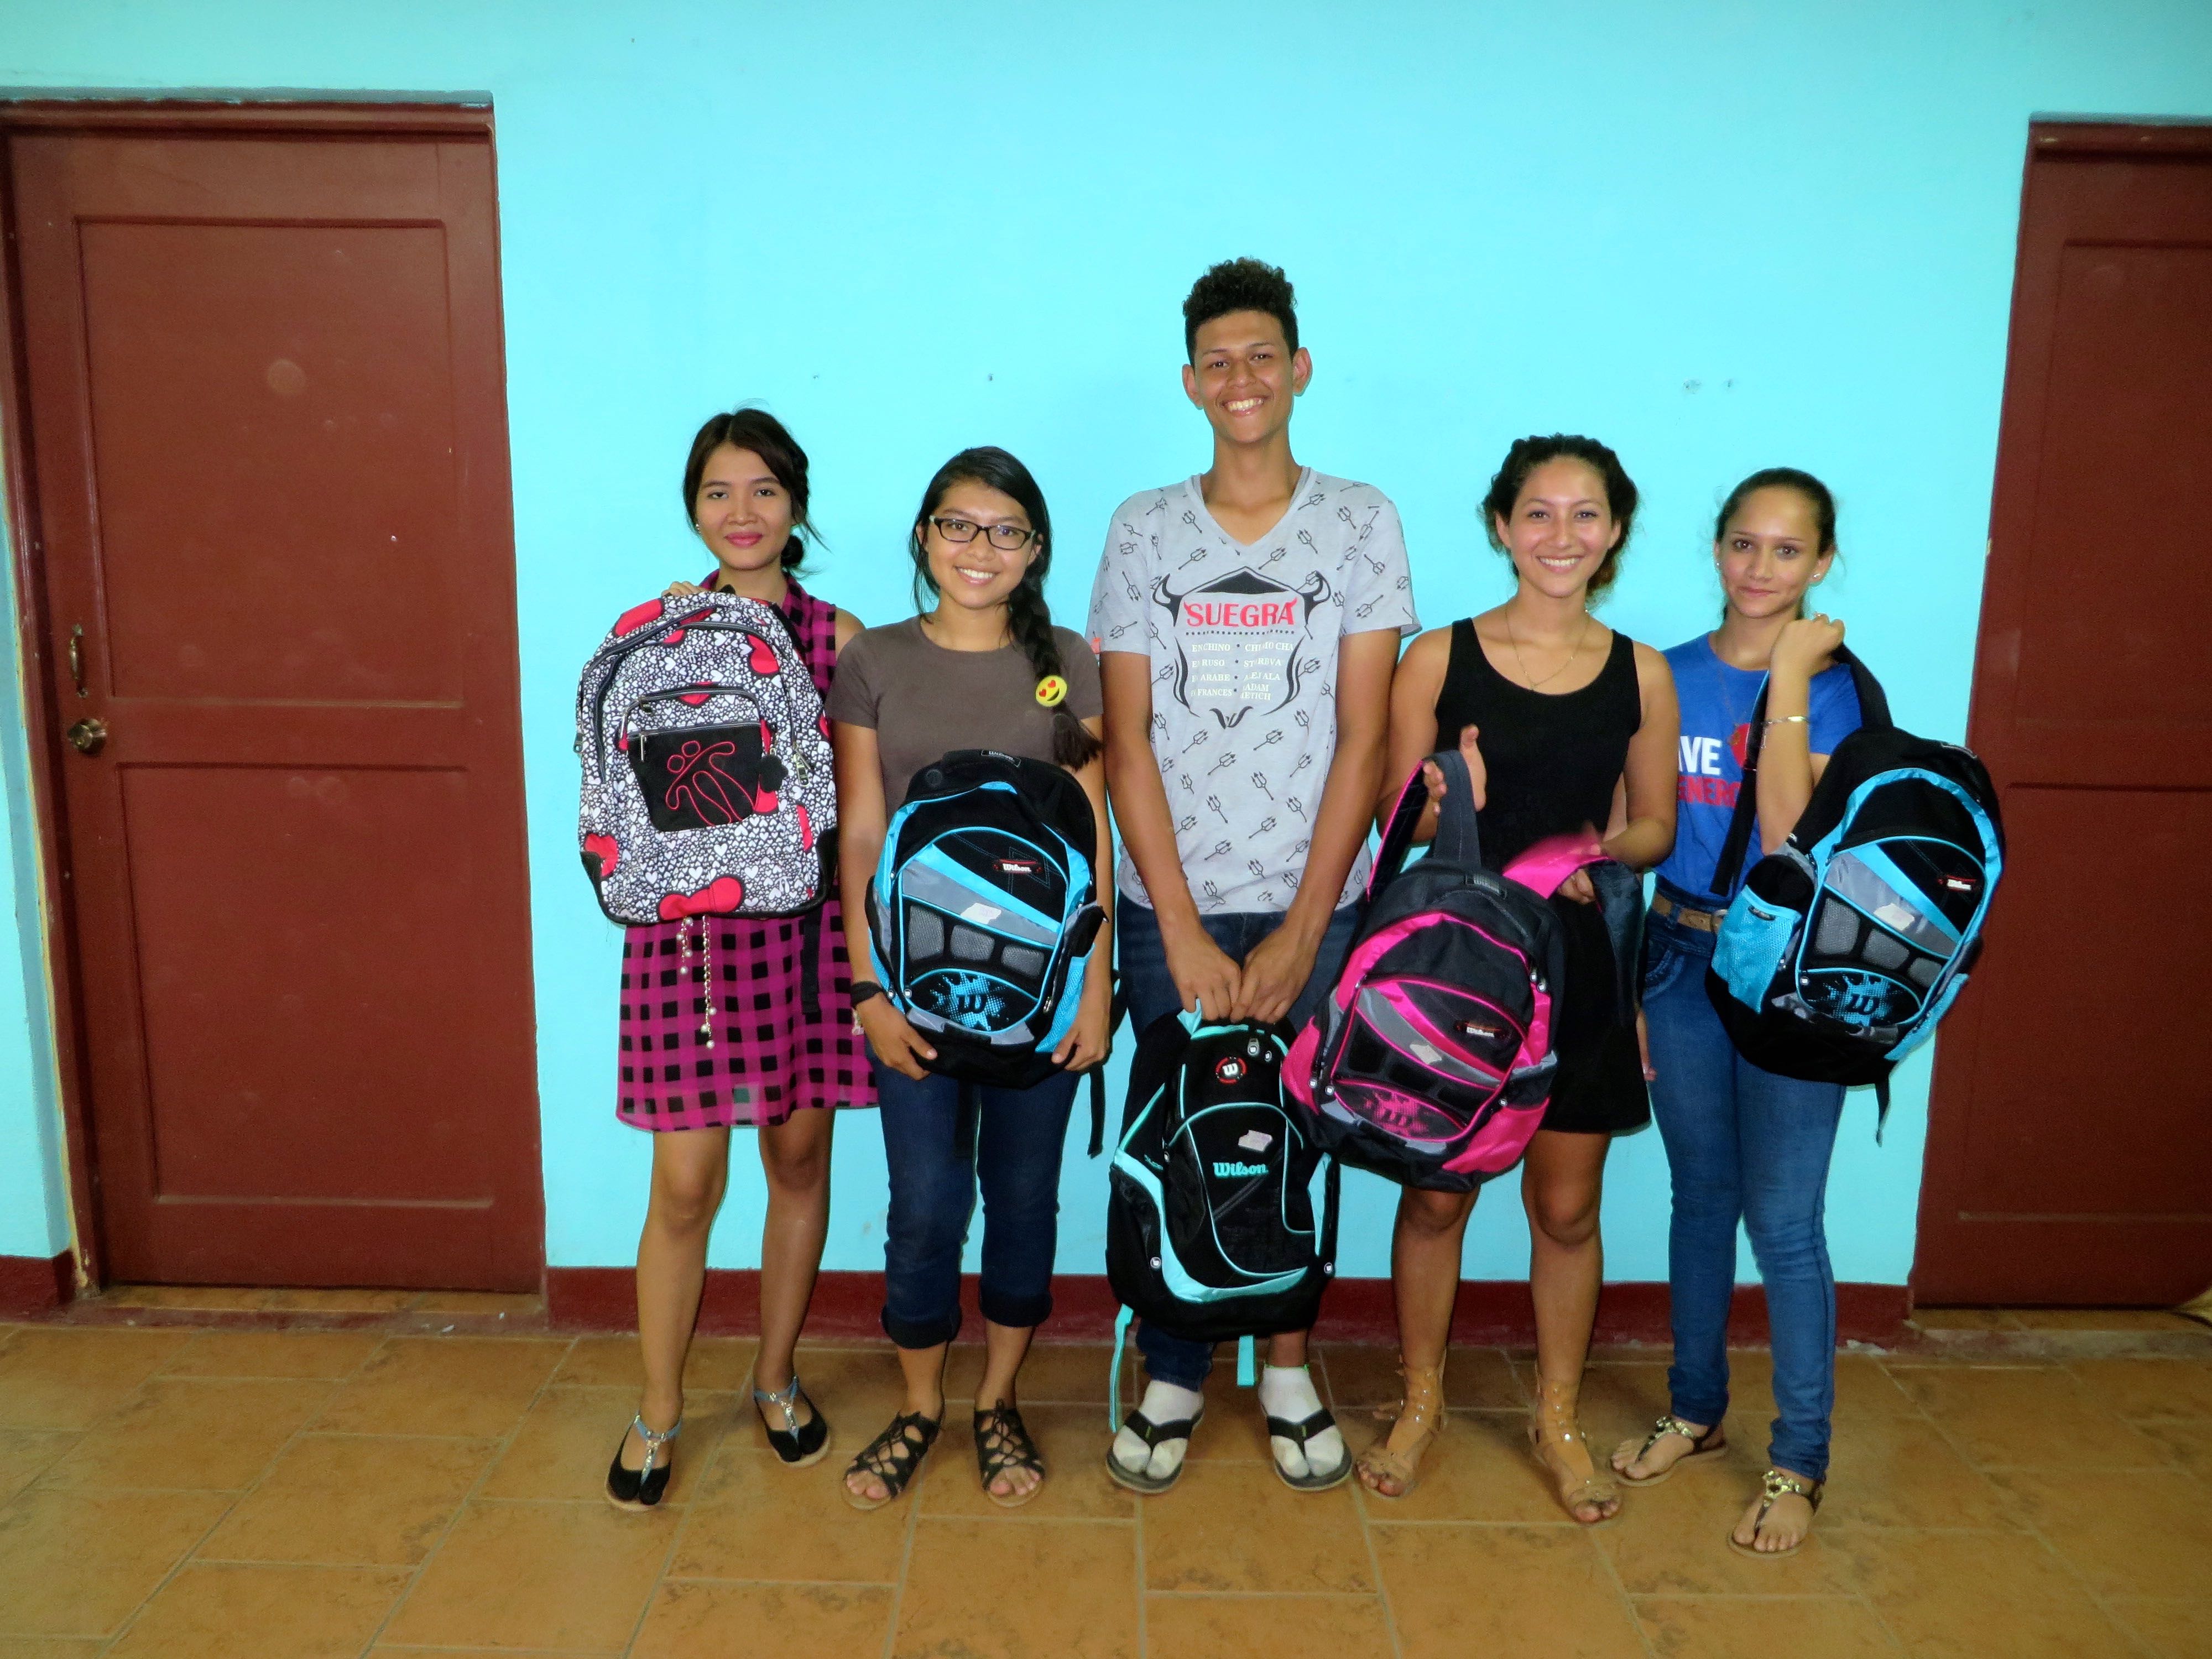 These students from Candelaria are beginning their 5th and final year of high school. 